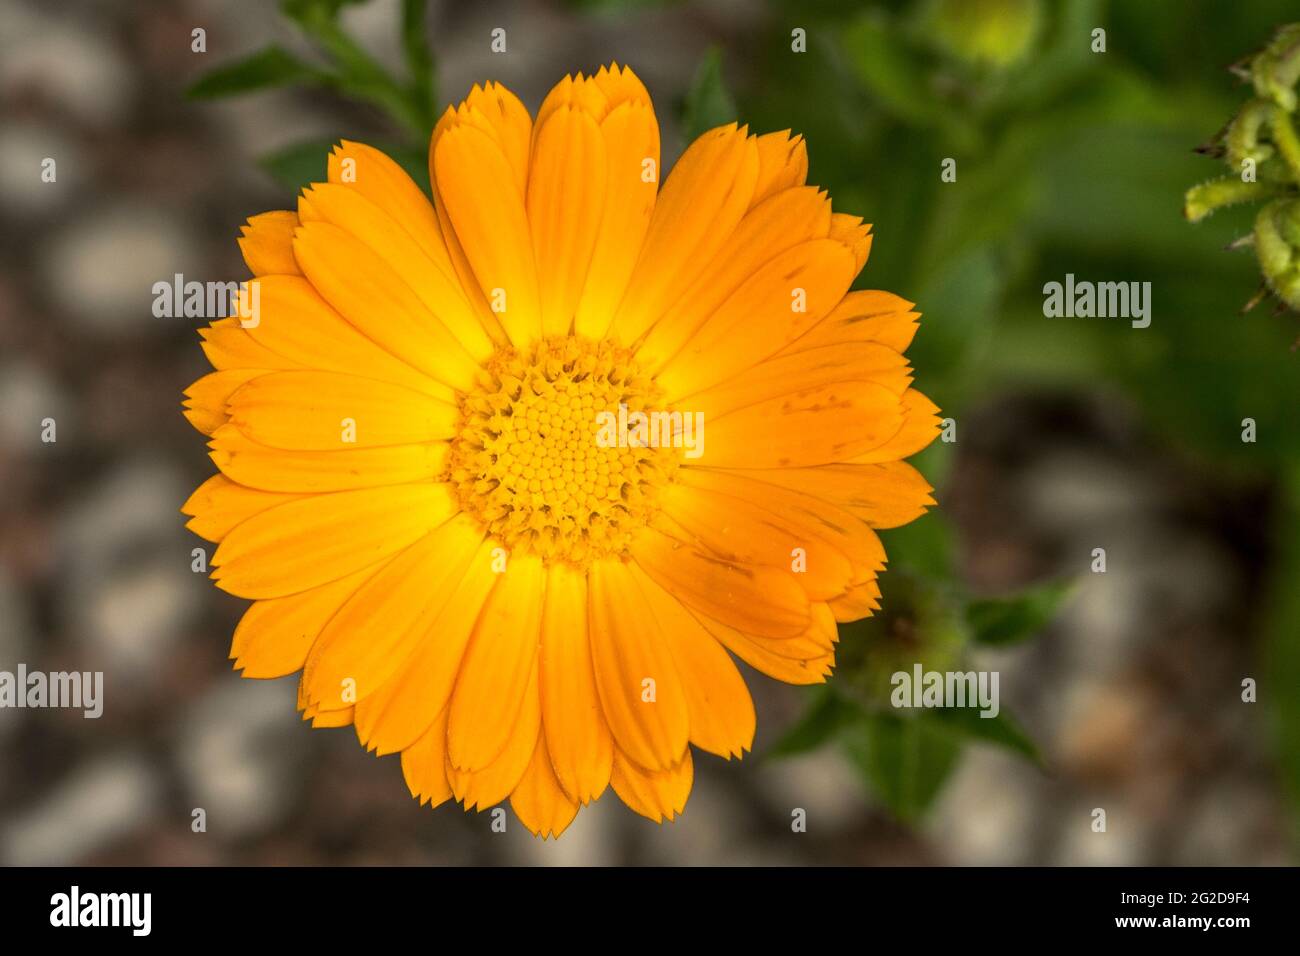 Beautiful marigold flower in the foreground Stock Photo